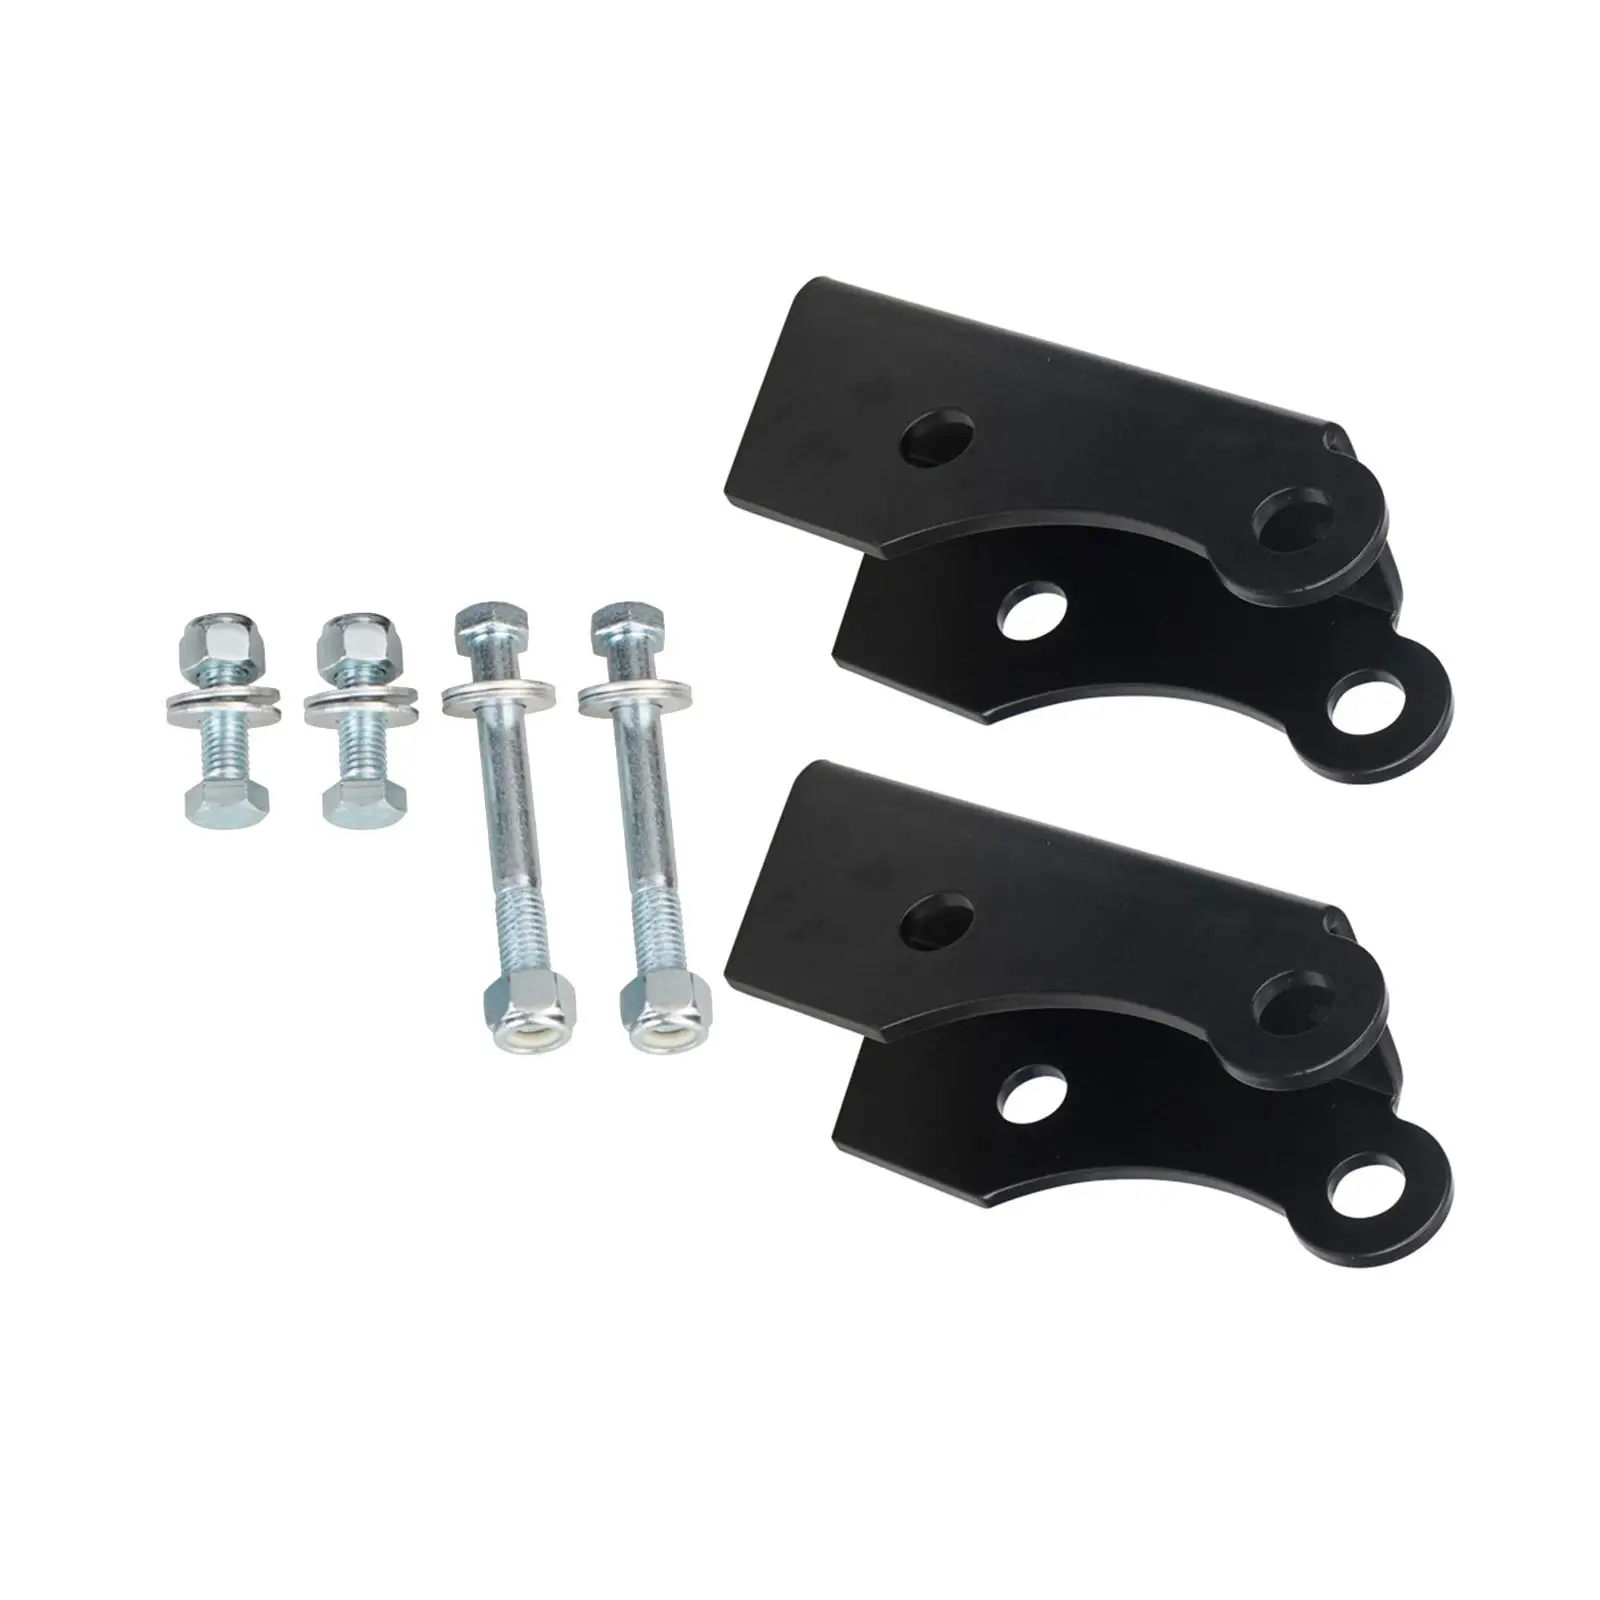 2Pcs Shocks Drop Lowering Extension Brackets Accessories High Performance Directly Replace Iron for Chevrolet Silverado C10